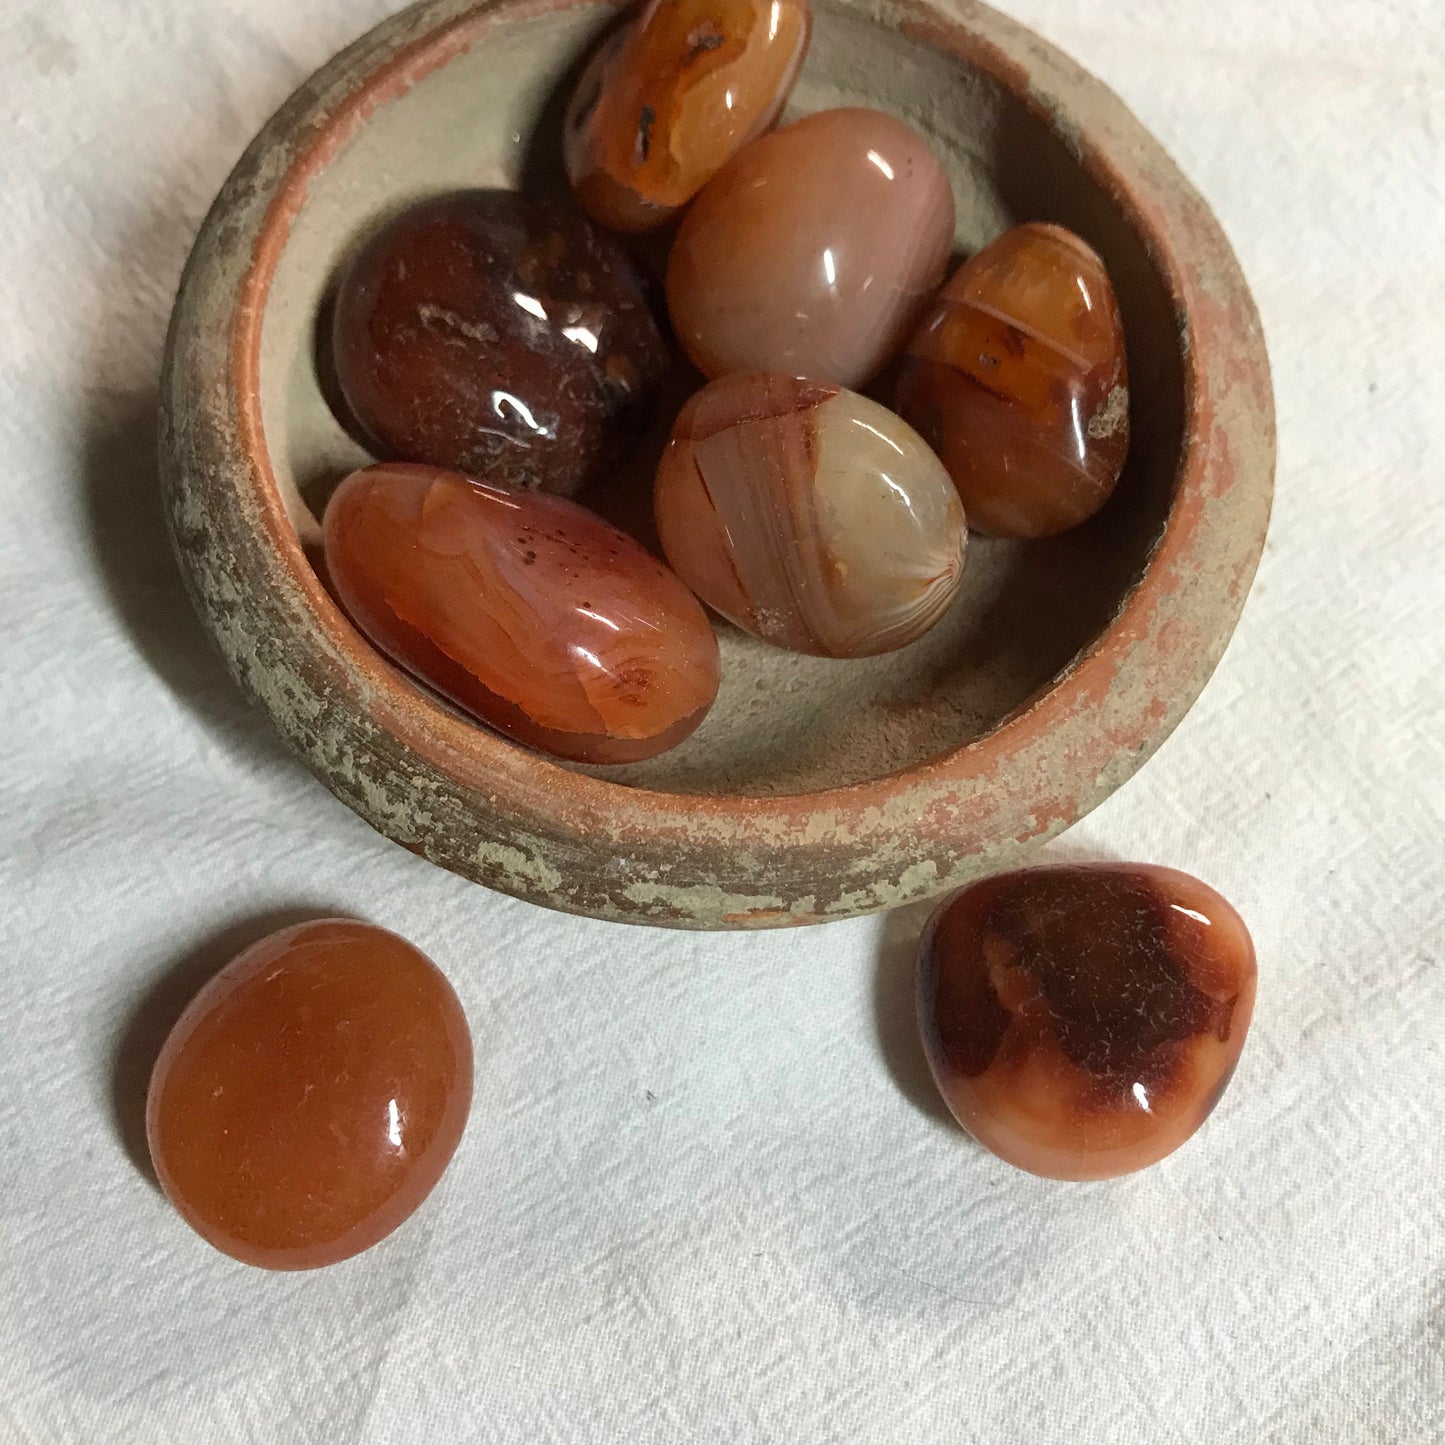 Carnelian Agate Tumbled Polished (Approx 1" - 1 1/4") Polished Stone for Crystal Grid, Wire Wrapping or Craft Supply 0661